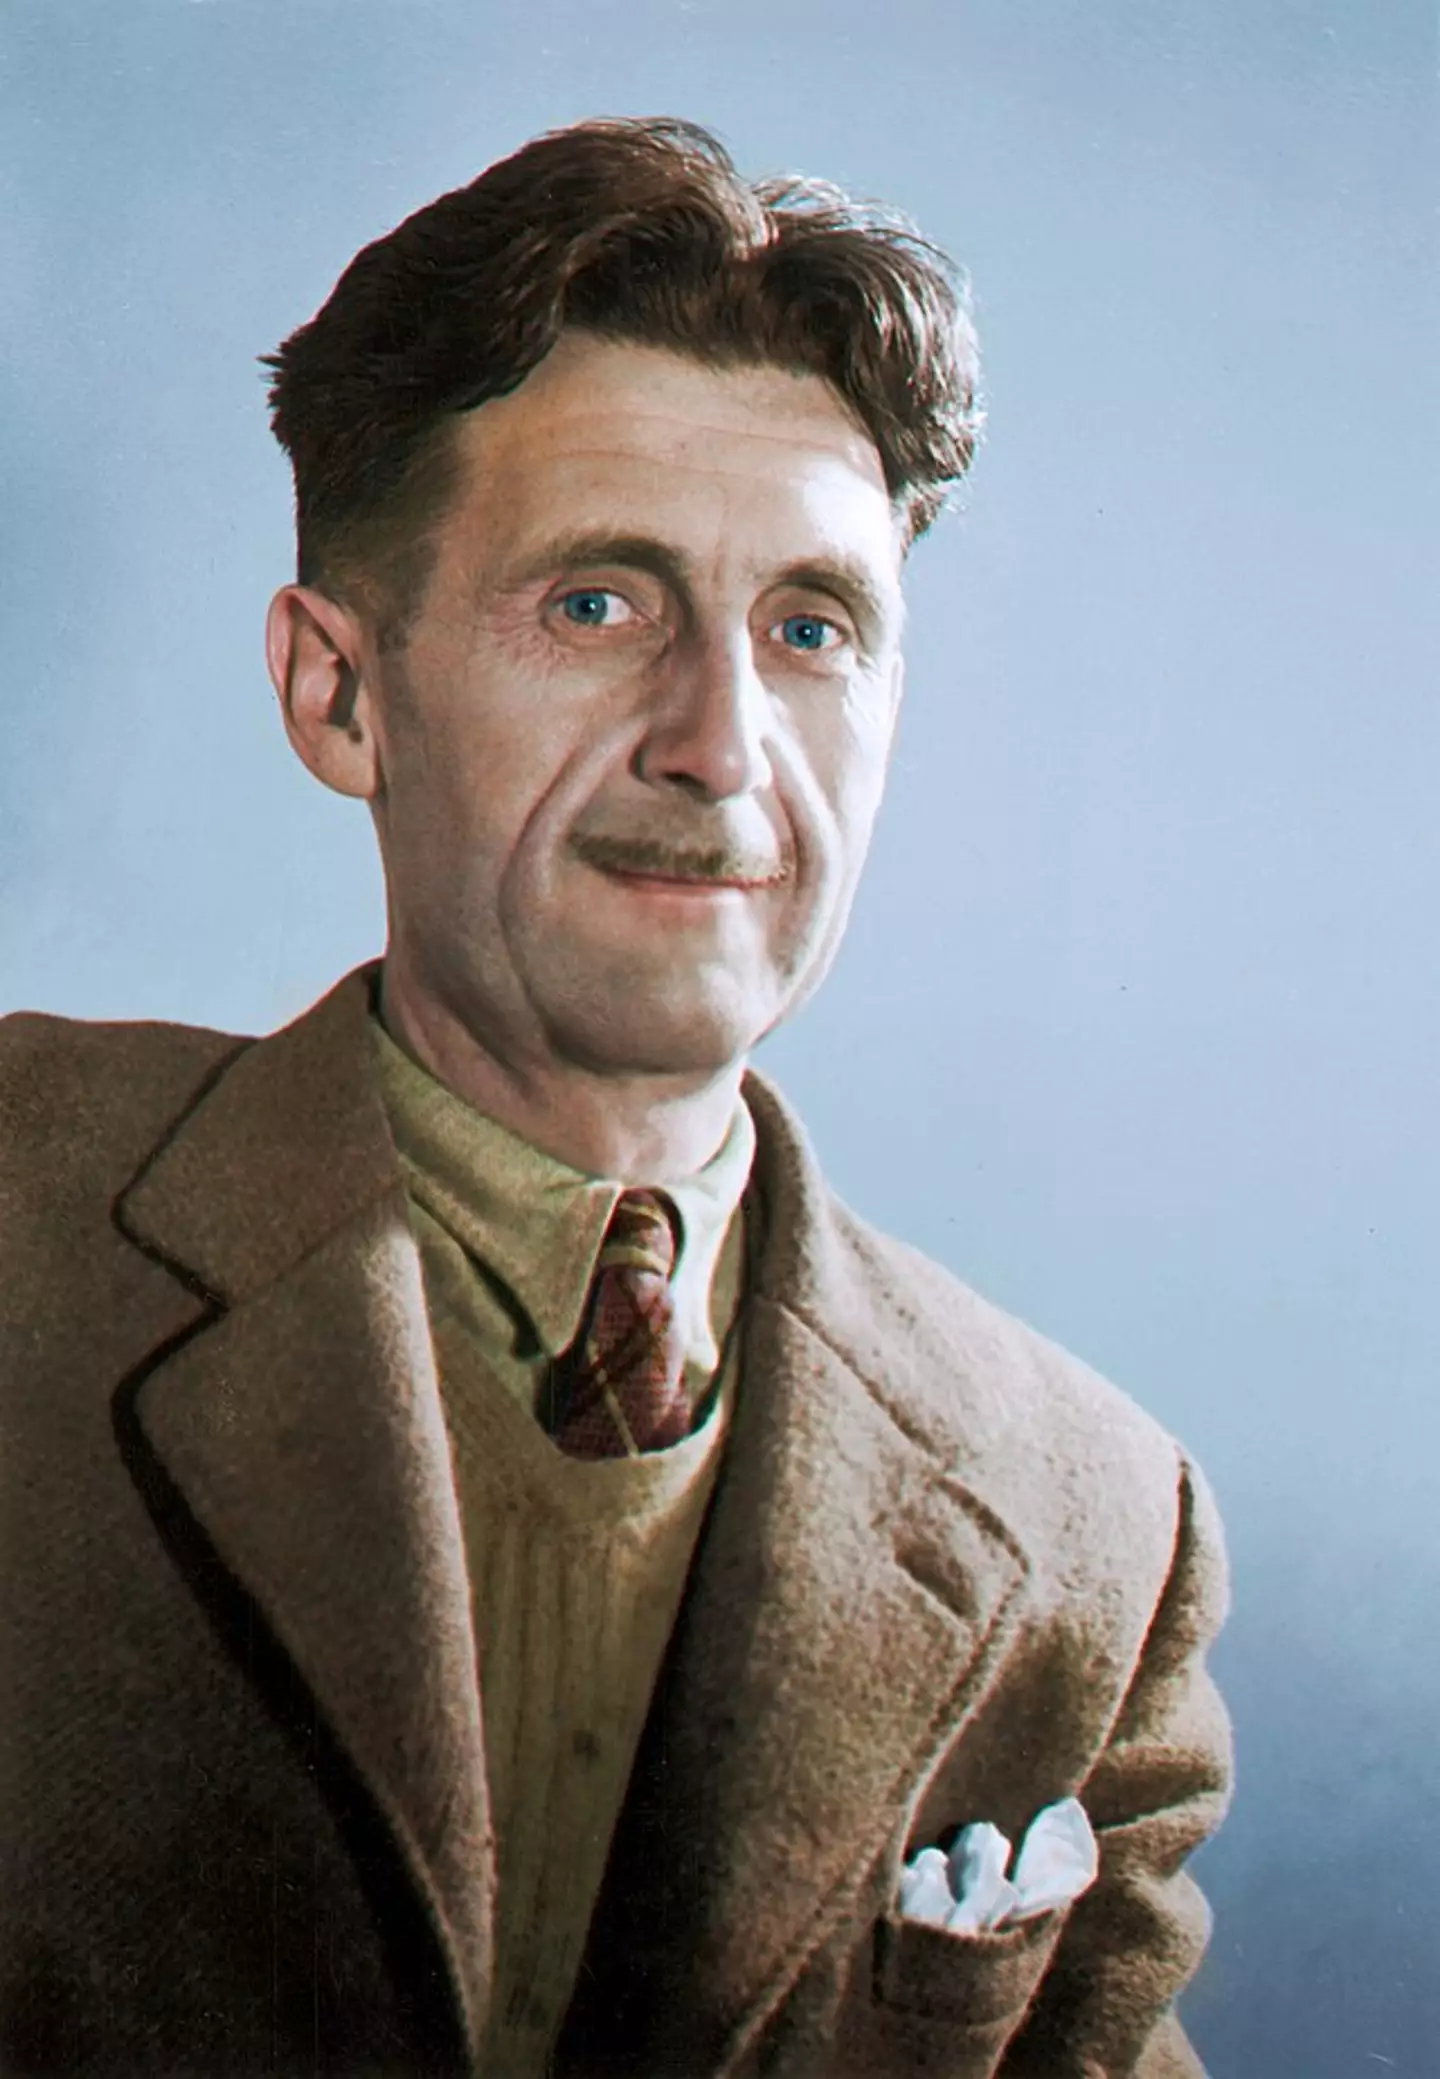 The method was used to uncover information about the iconic 1984 writer George Orwell.